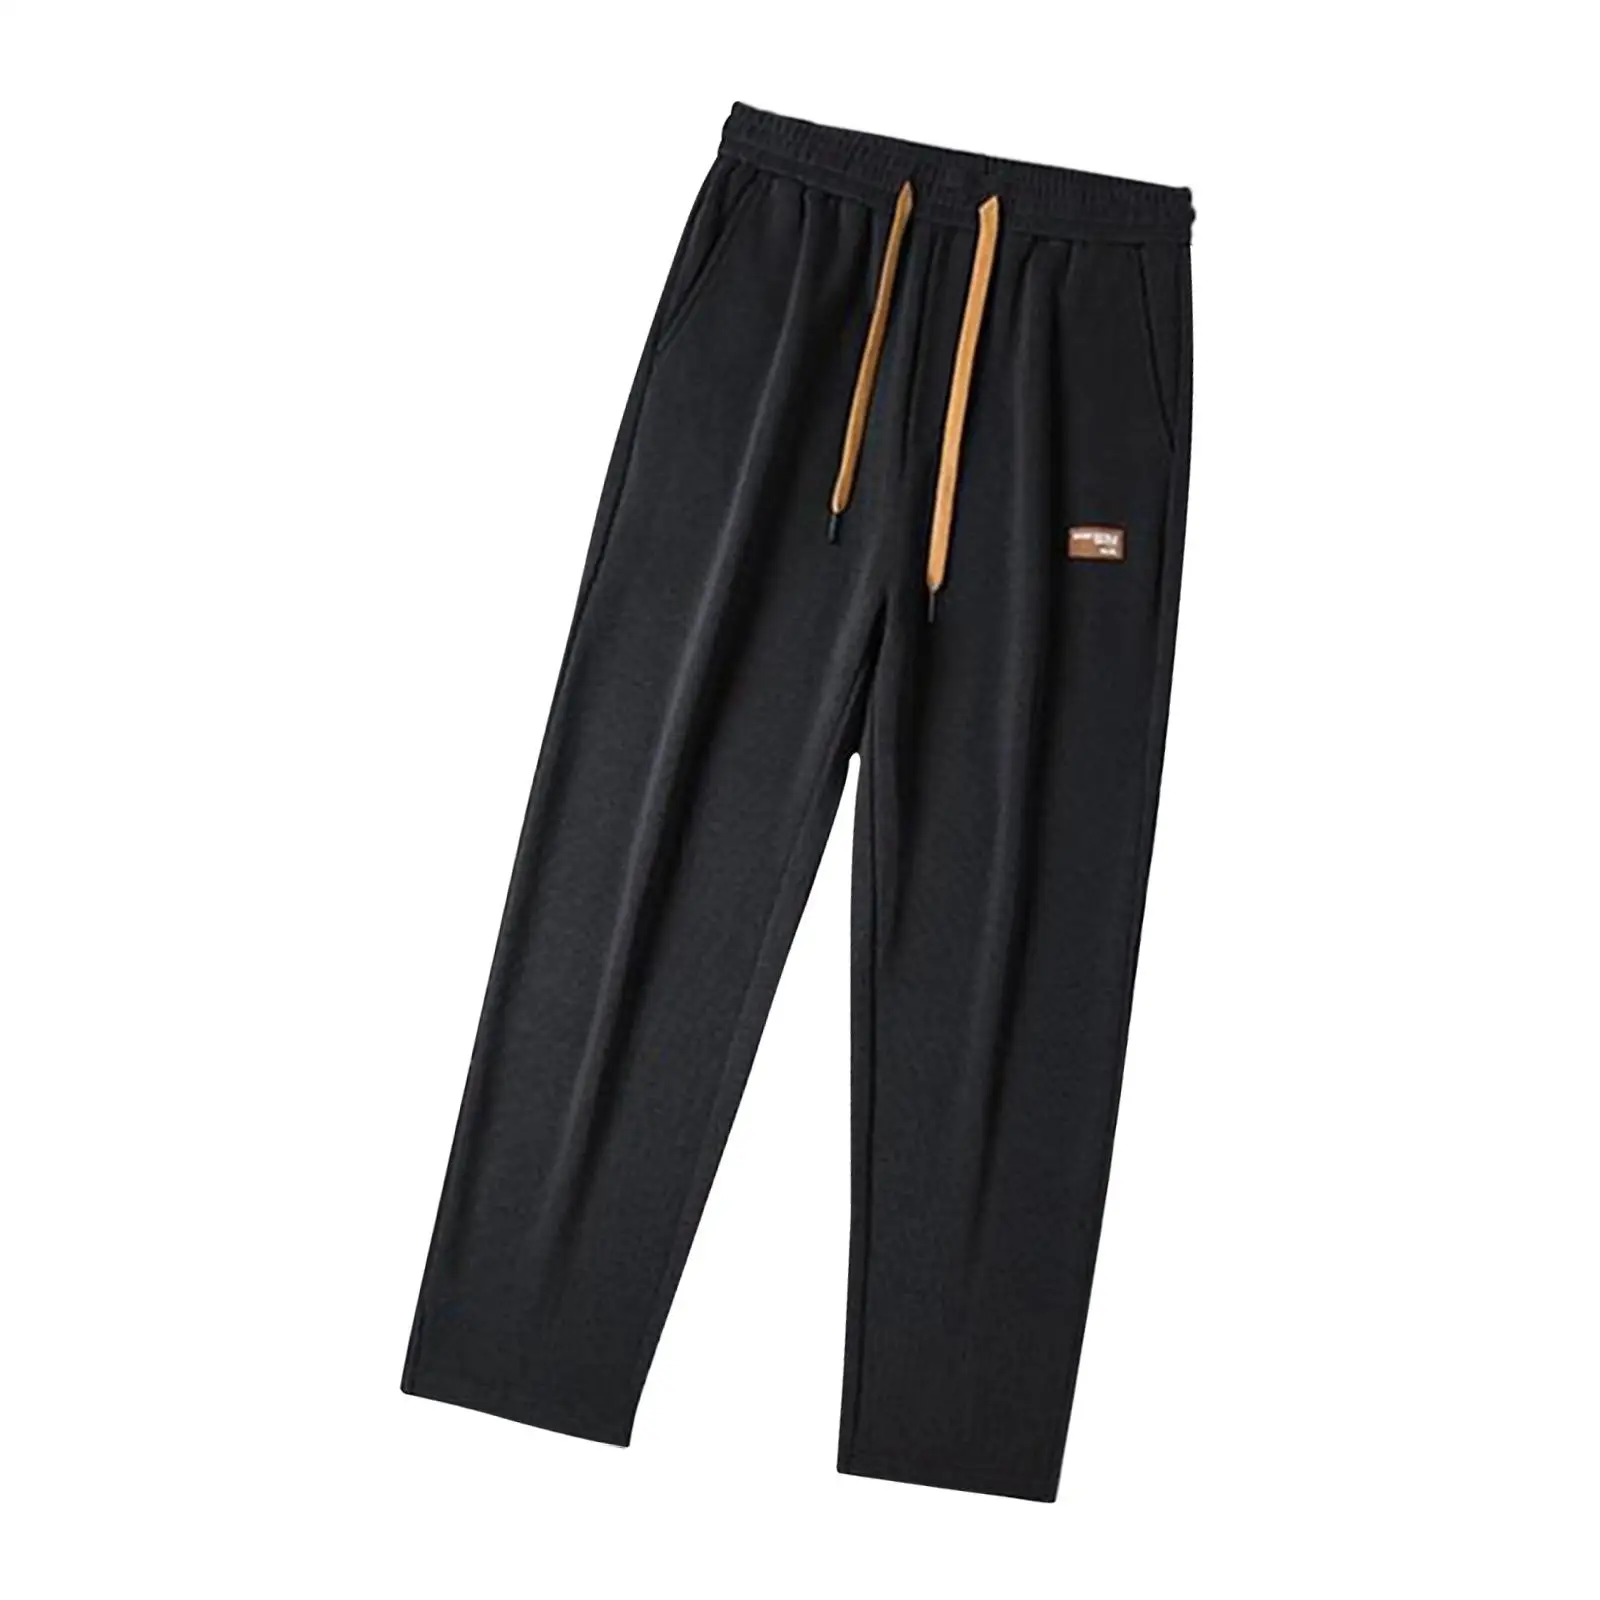 Men Sweatpants Trousers Loose Fit Sports Casual with Pockets Straight Pants for Running Cycling Jogging Hiking Driving